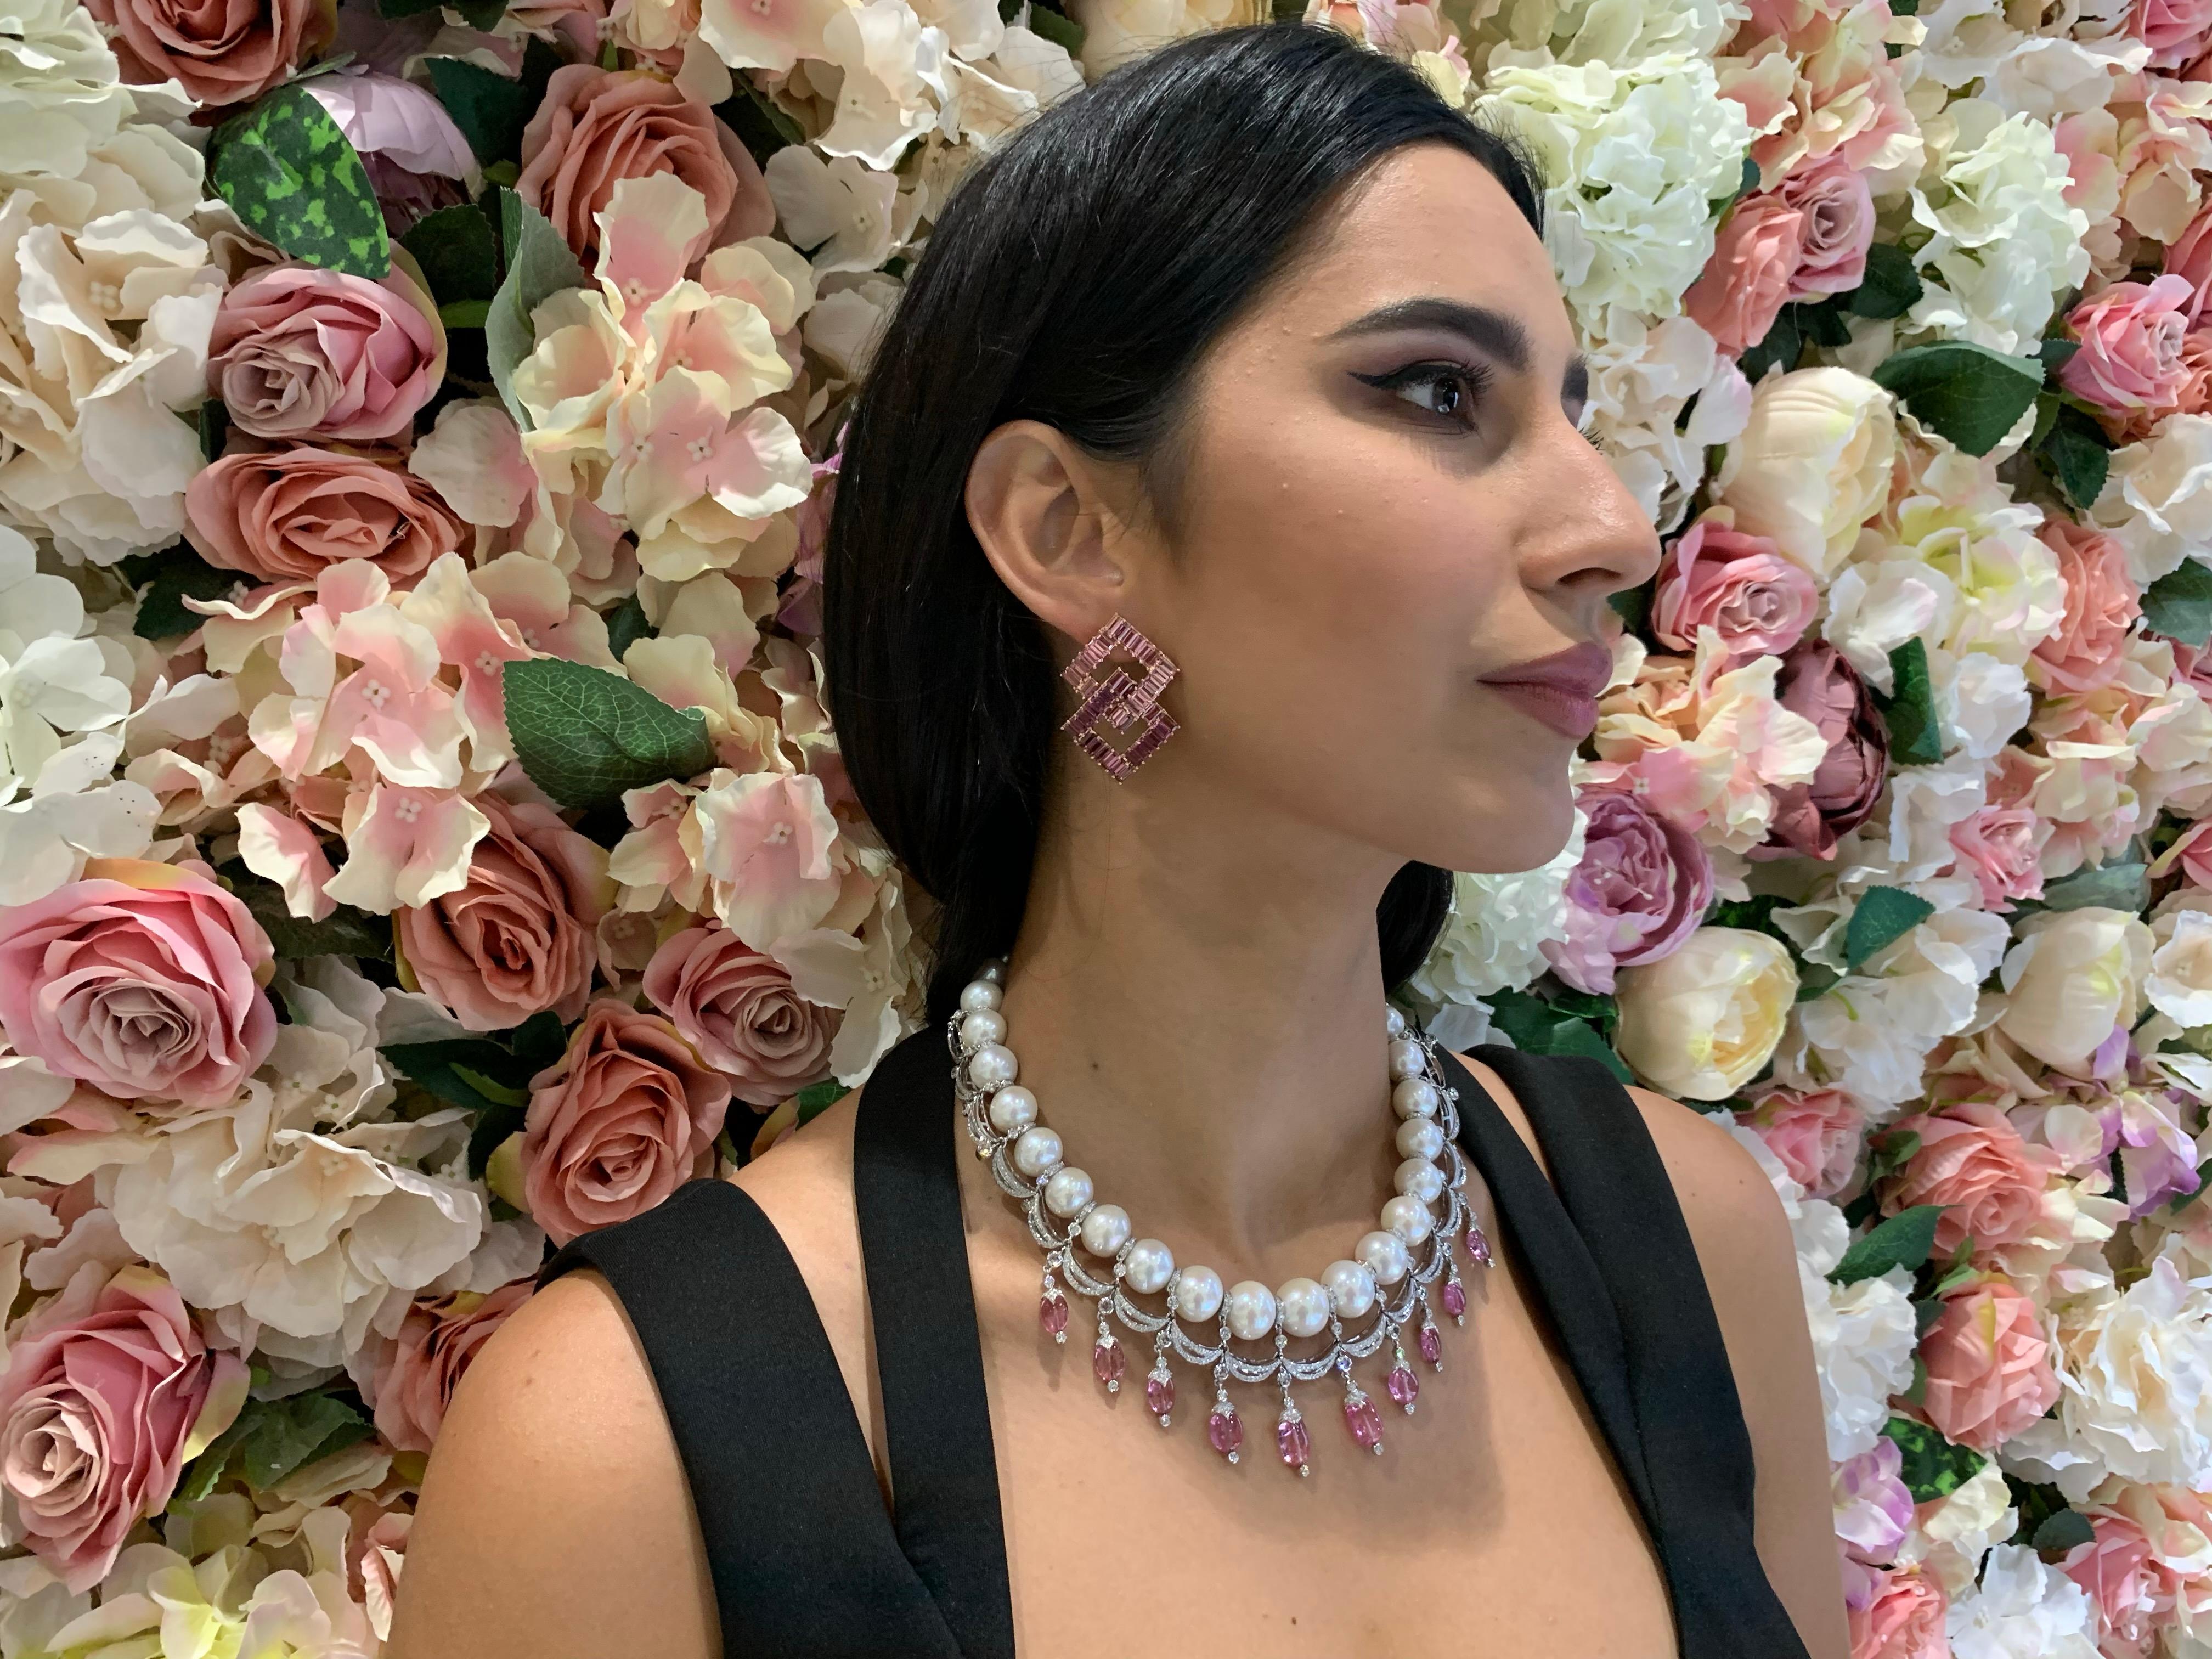 Sunita Nahata presents an exclusive designer earring adorned with the best pink tourmalines. The unique baguette cut on these gemstones make them one of a kind. But what makes this piece so special is the slight curvature of the geometric earring